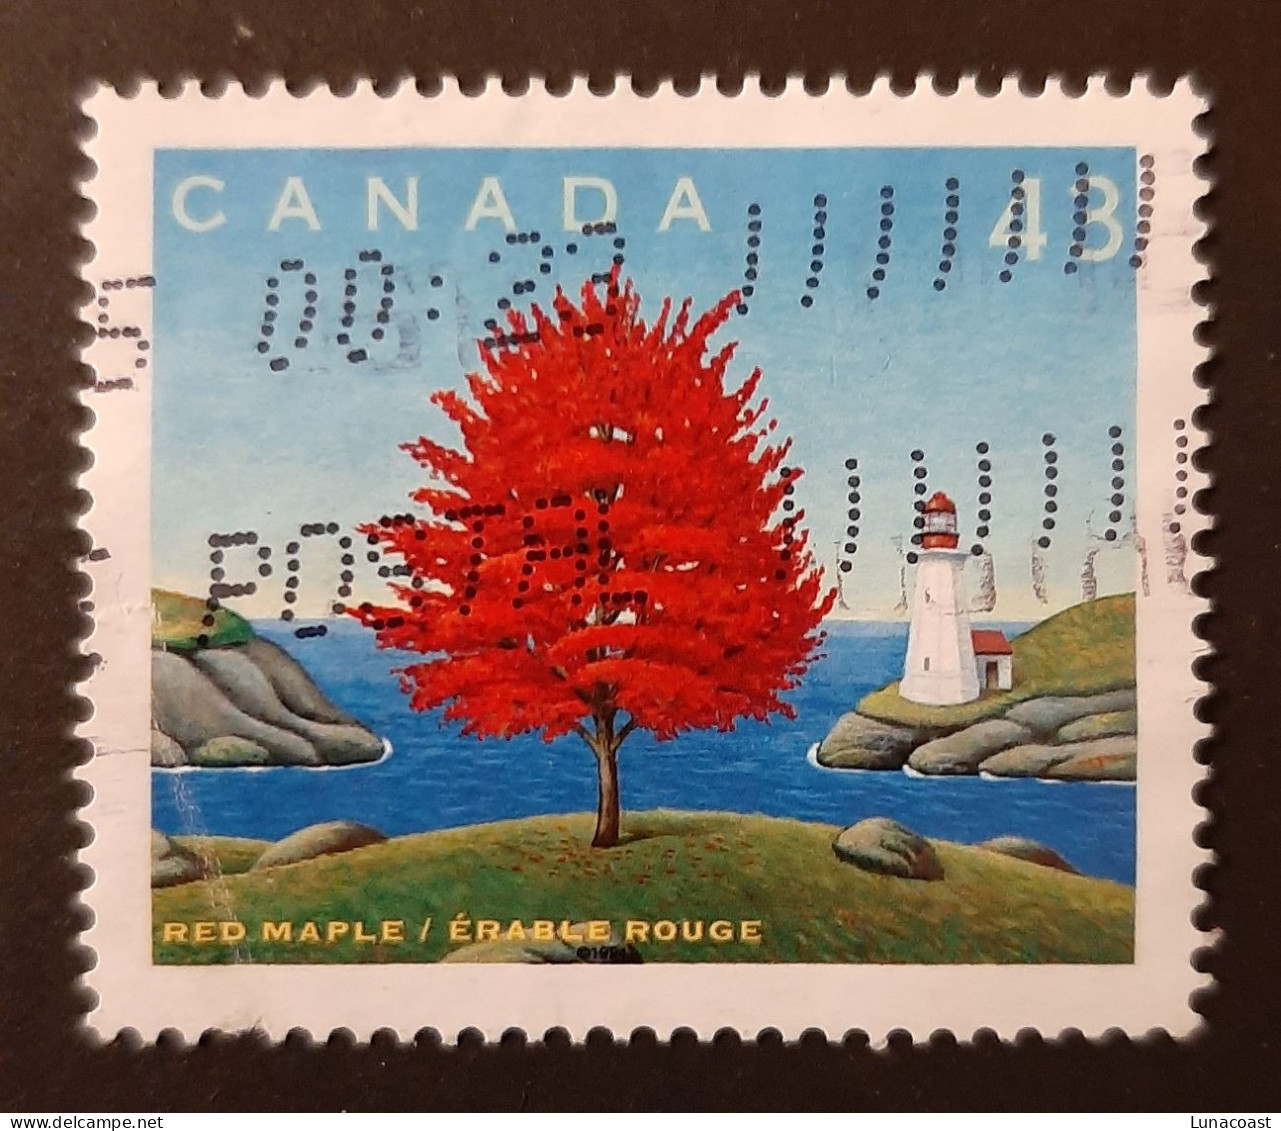 Canada 1994  USED  Sc1524 L   43c  Red Maple - Used Stamps